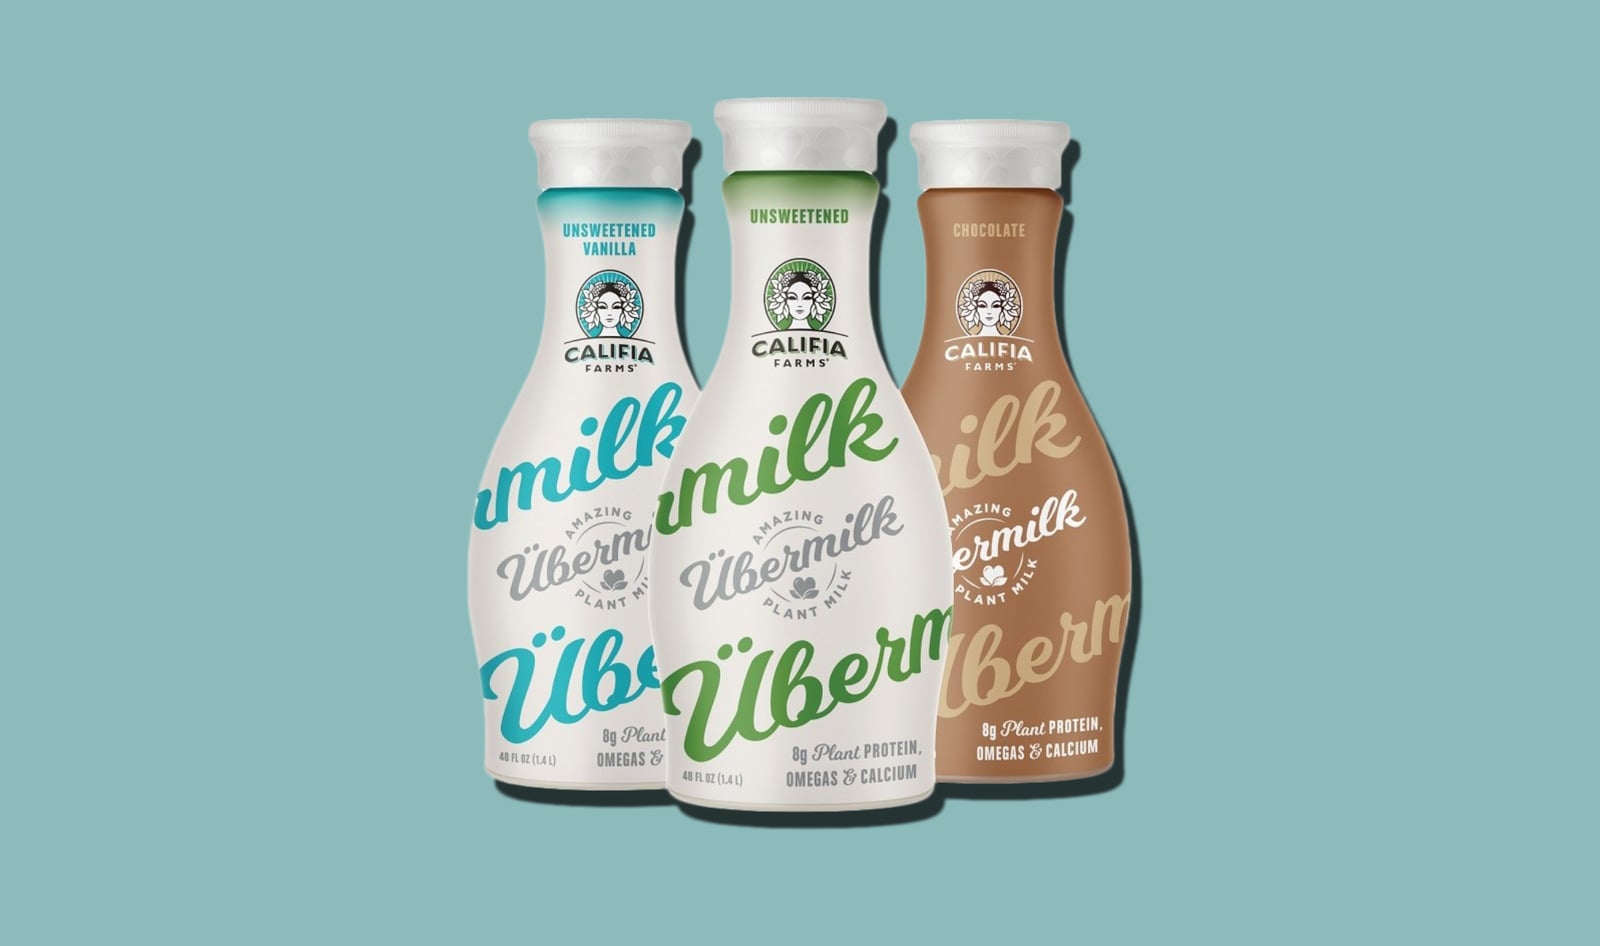 Vegan Brand Debuts “Übermilk” to Fight Dairy Industry’s Nutrition Claims